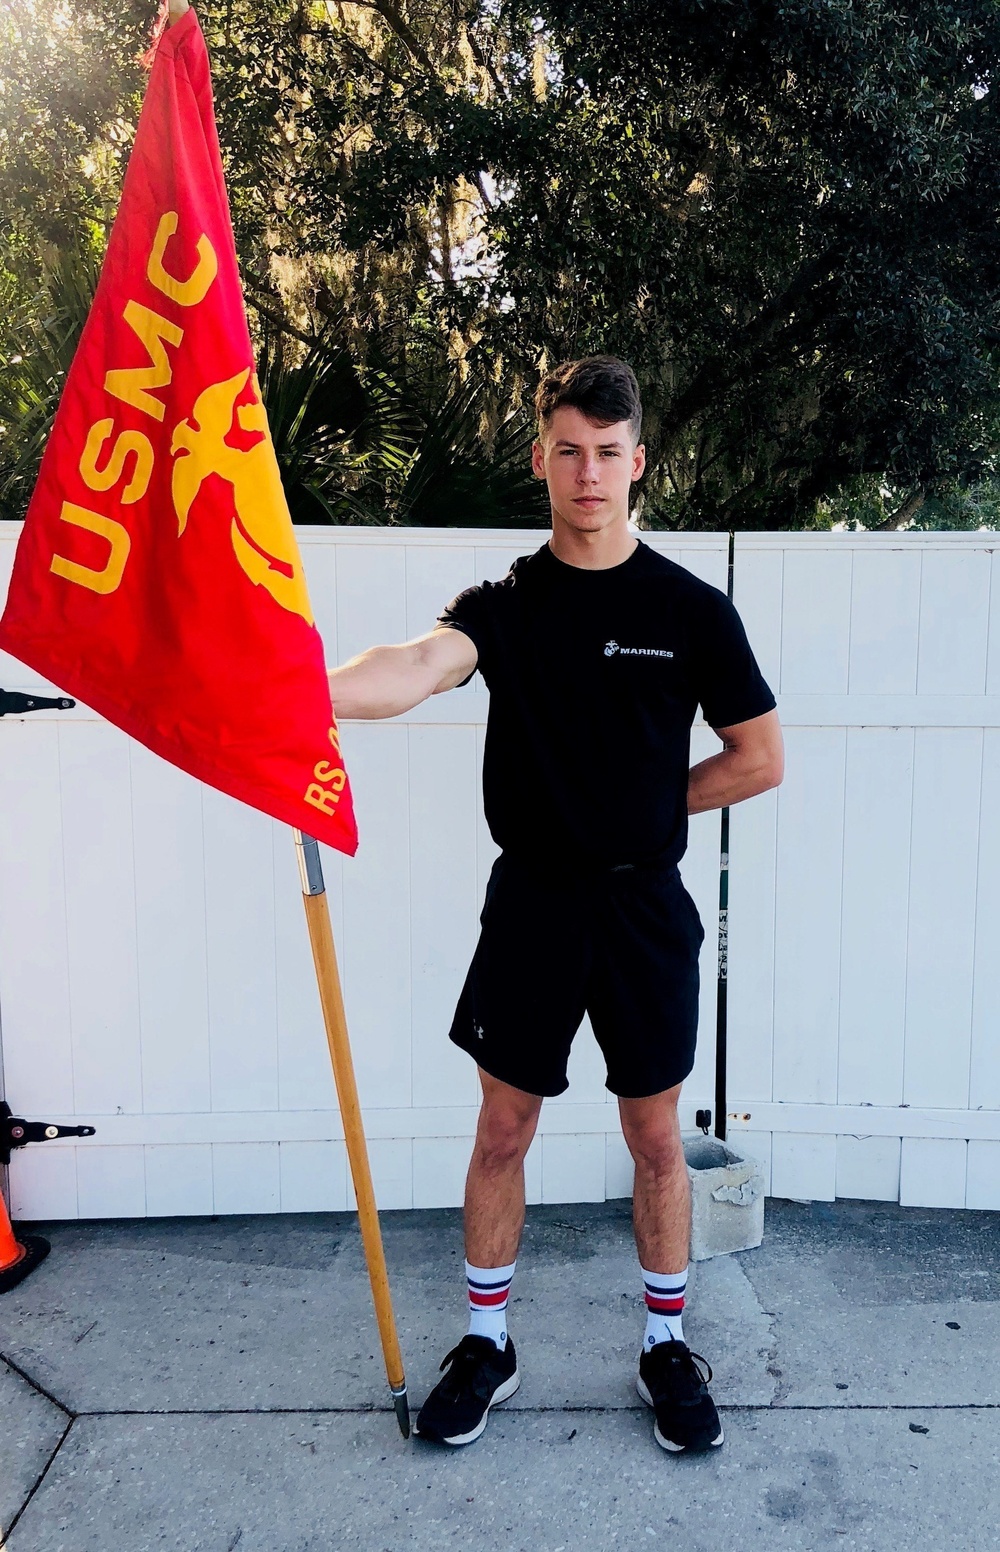 Florida native opts Marine Corps over college scholarships